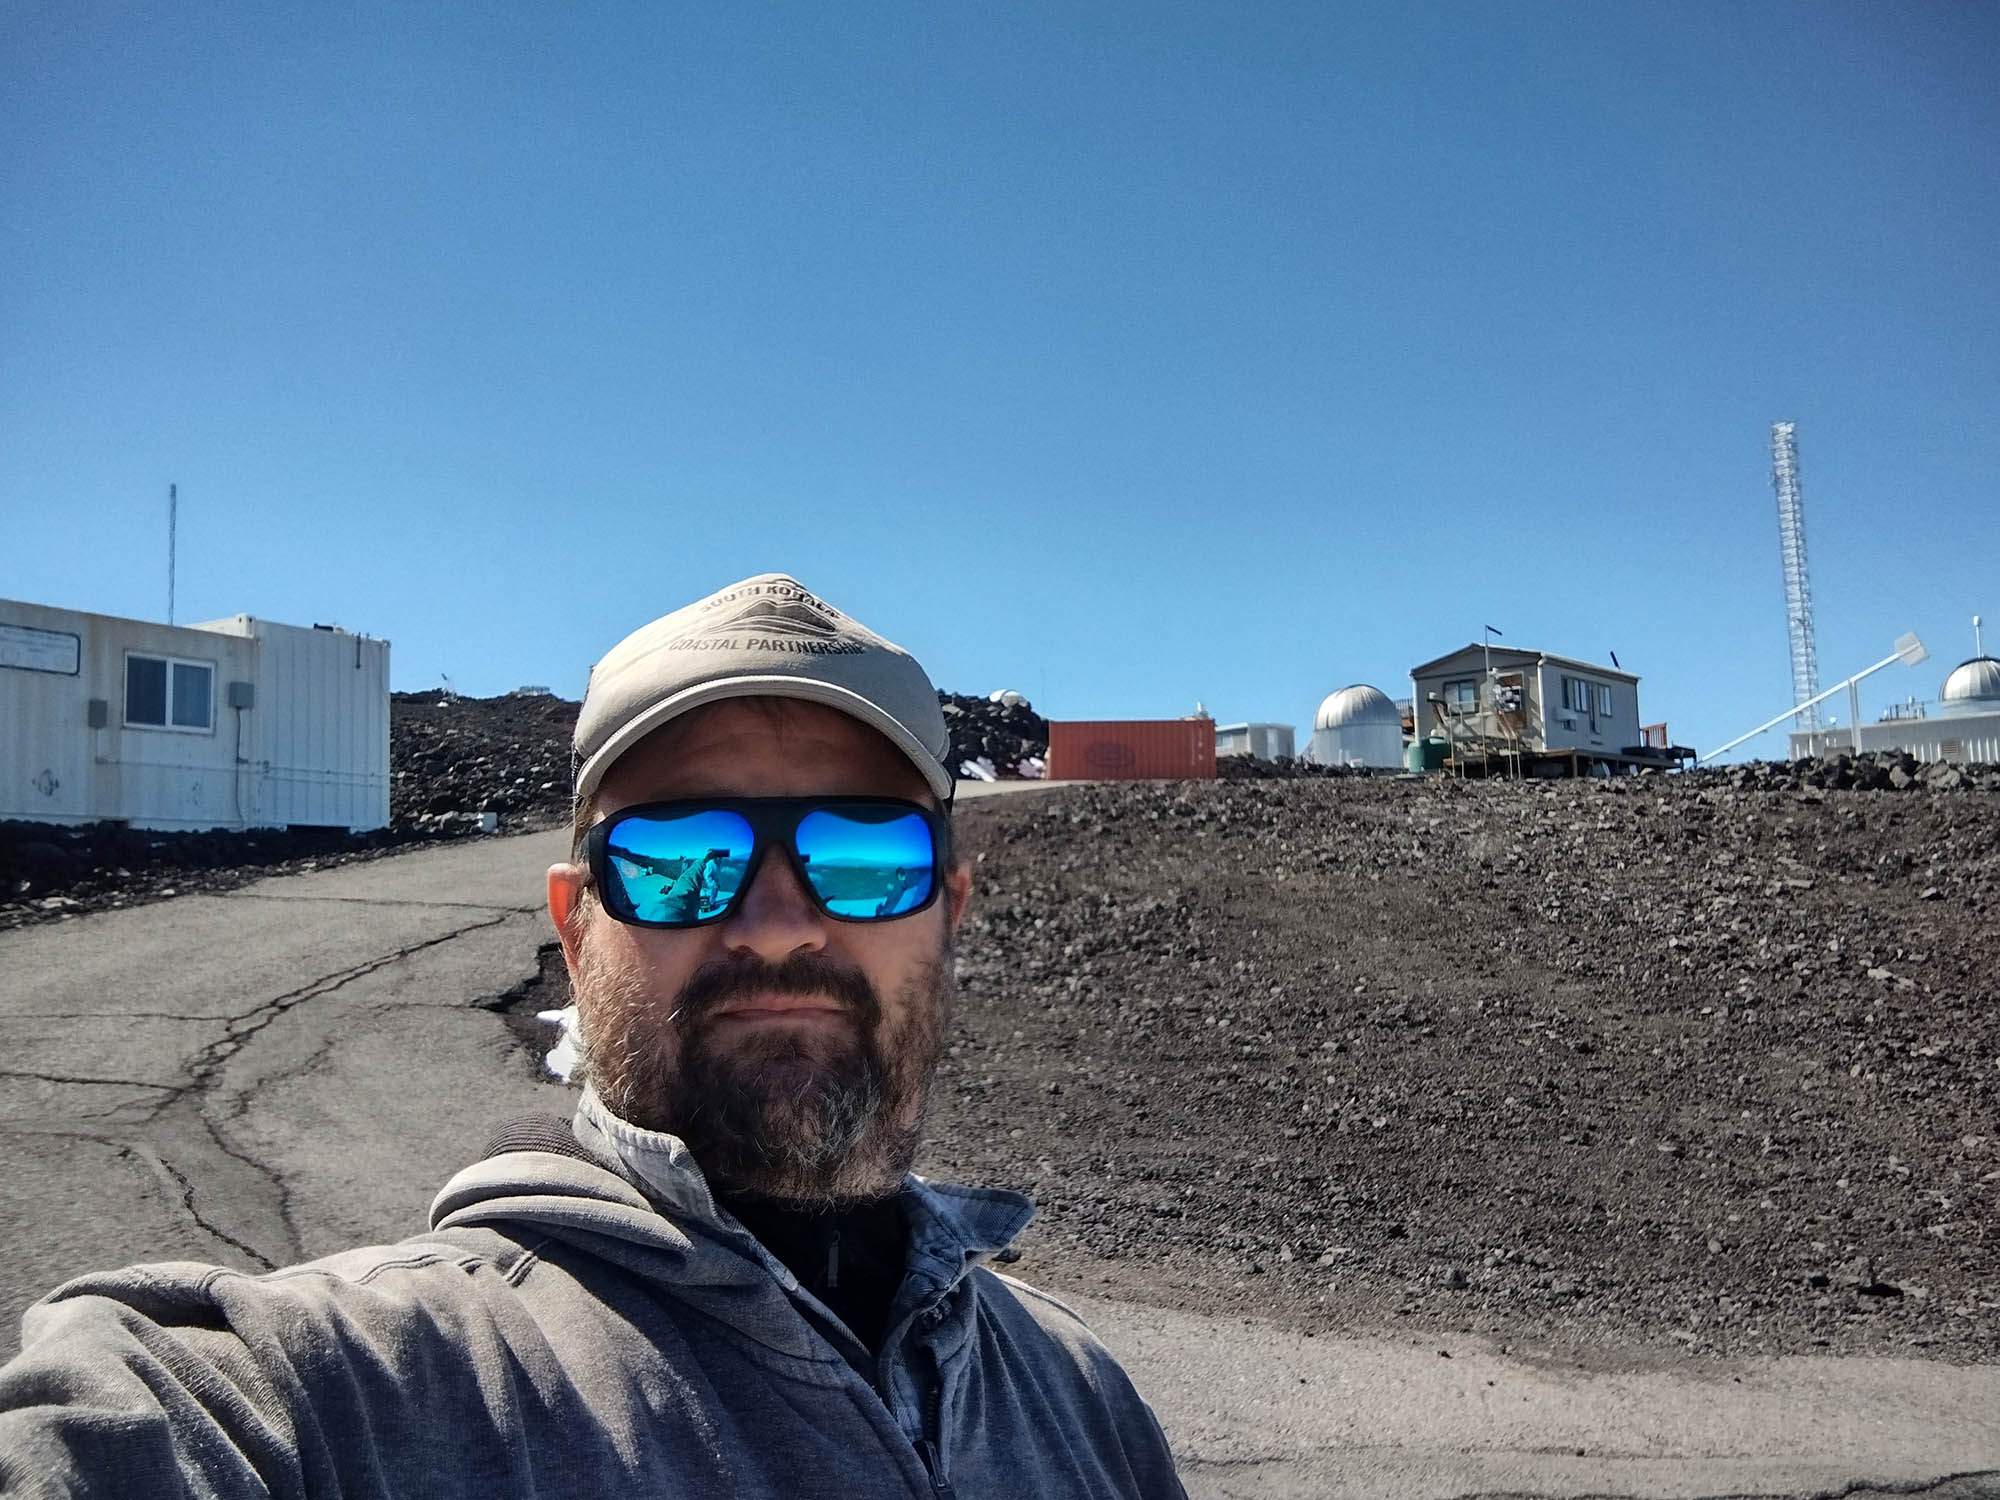 Ben Berkey at the Mauna Loa Observatory site with NOAA and GONG facilities in the background